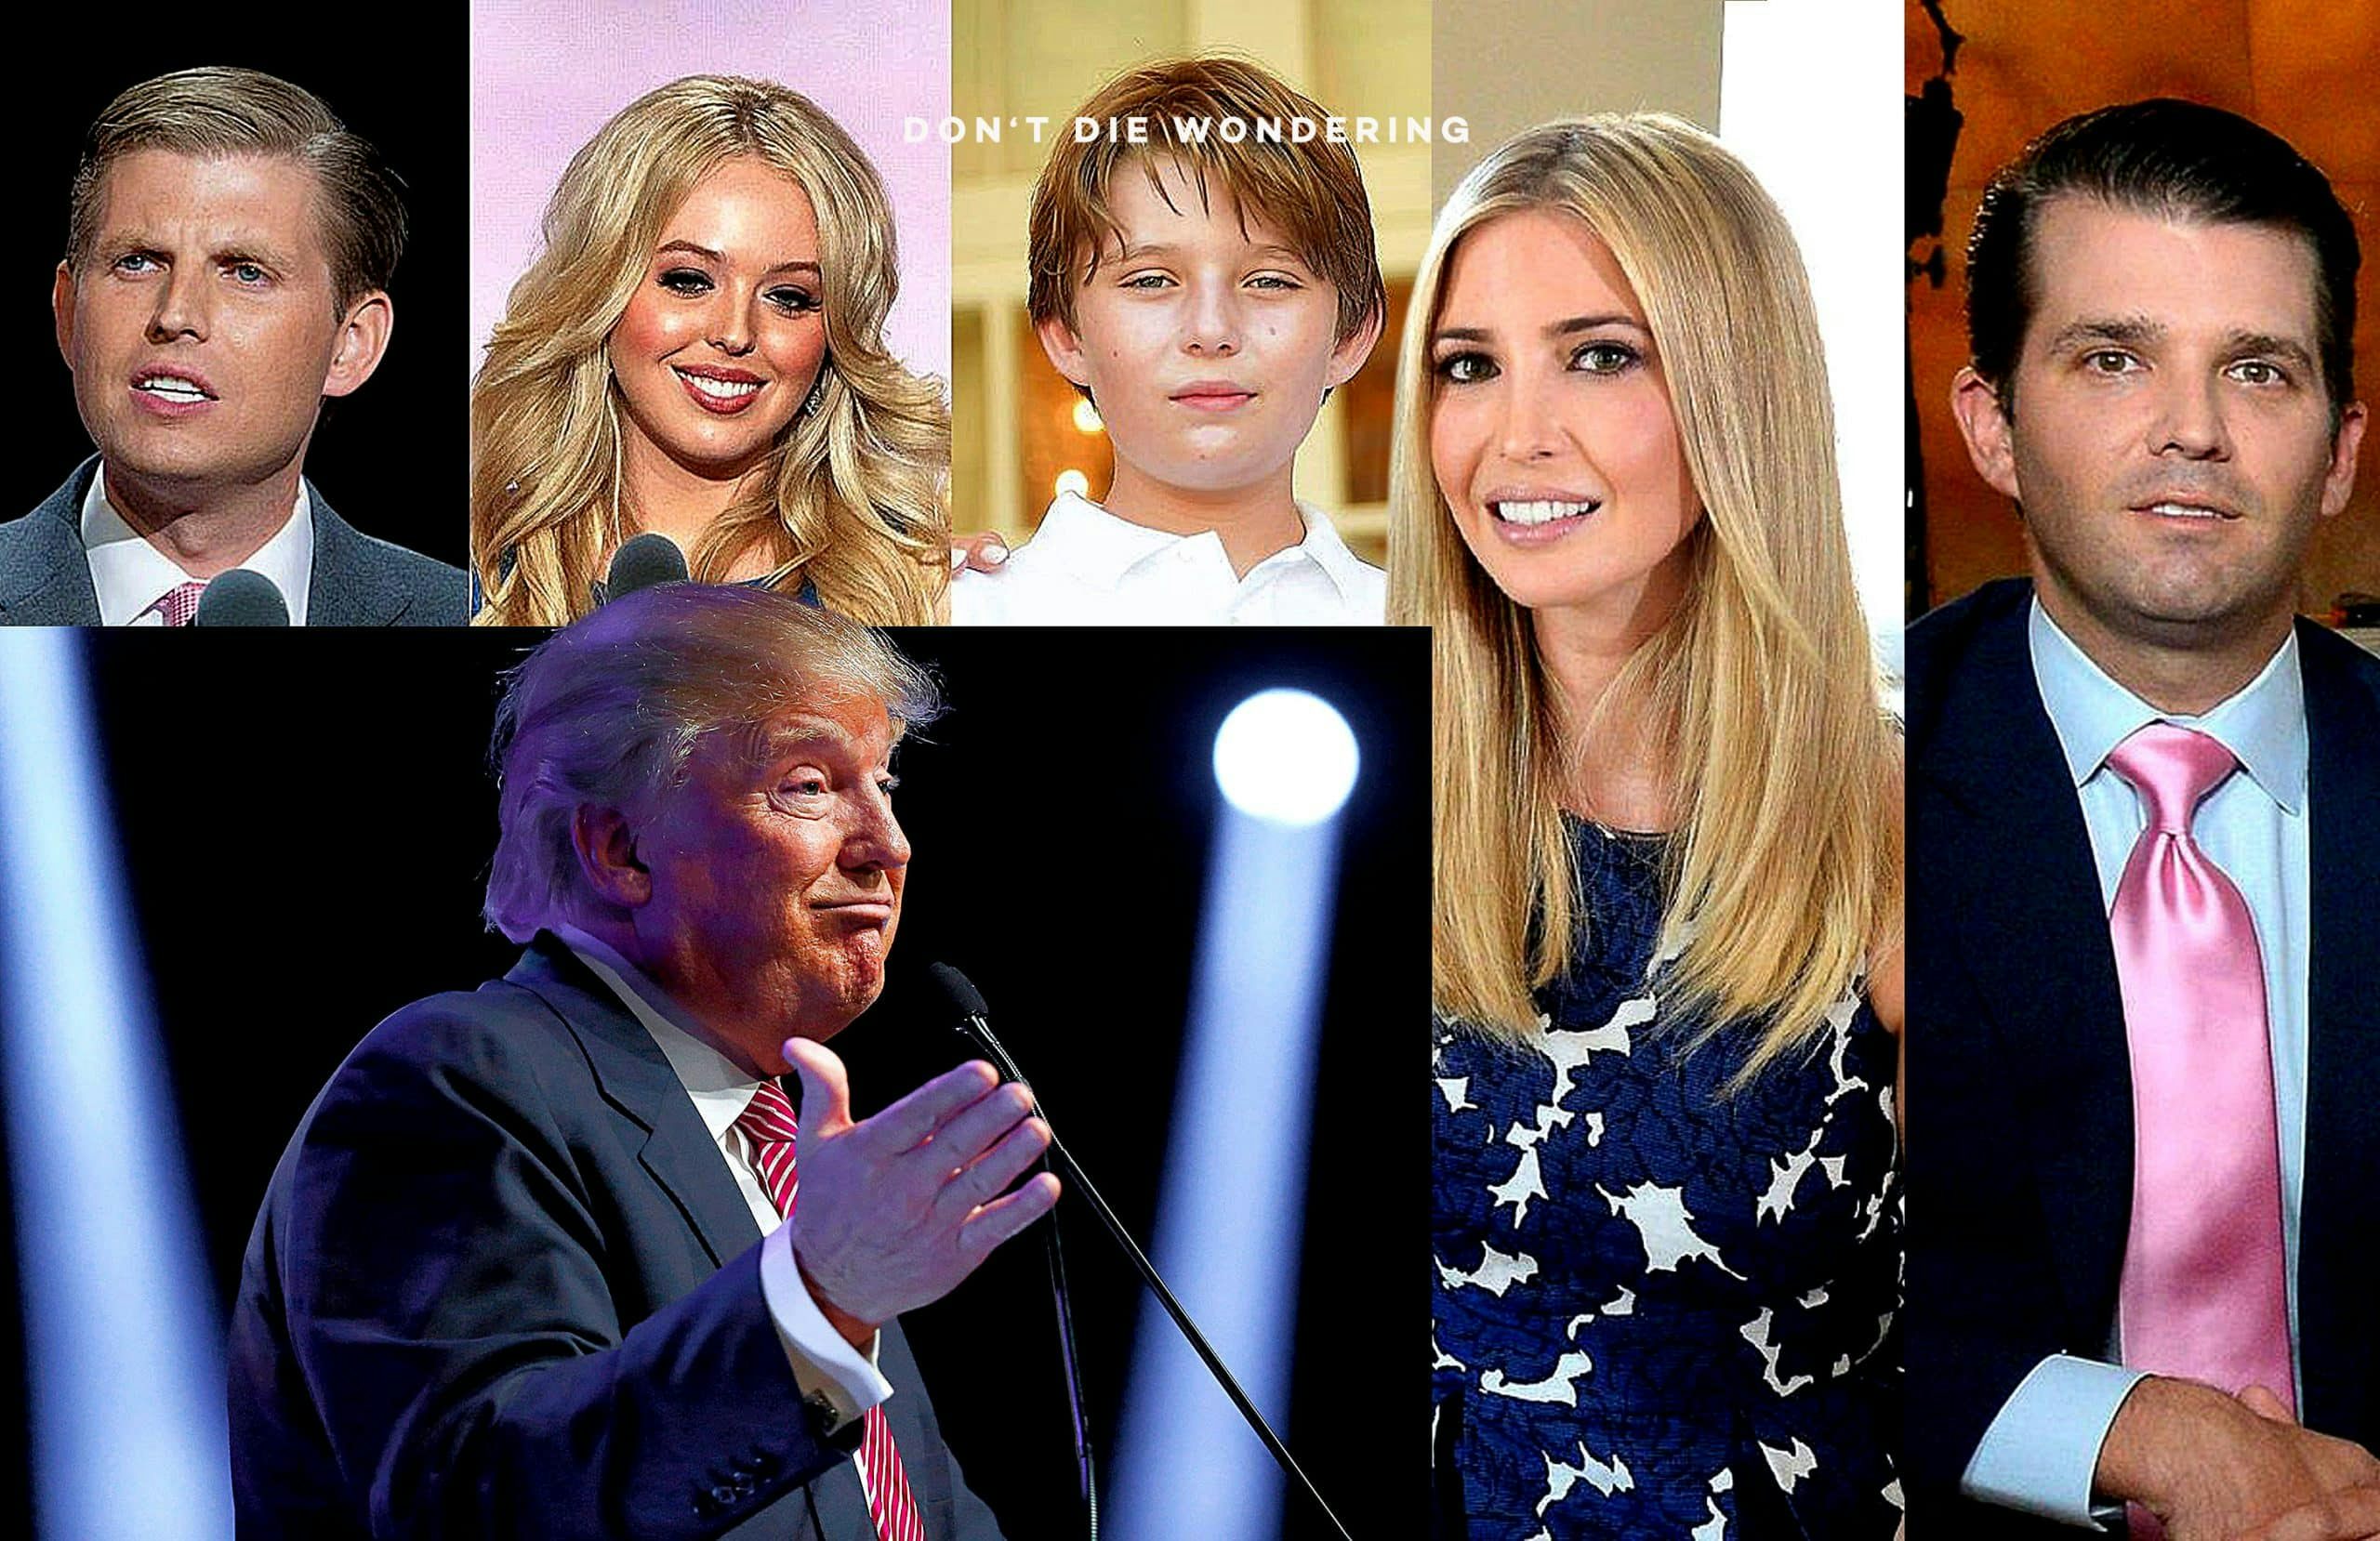 House Of Trump: What Was Early Life Like For The Children Of America’s Most Controversial President?